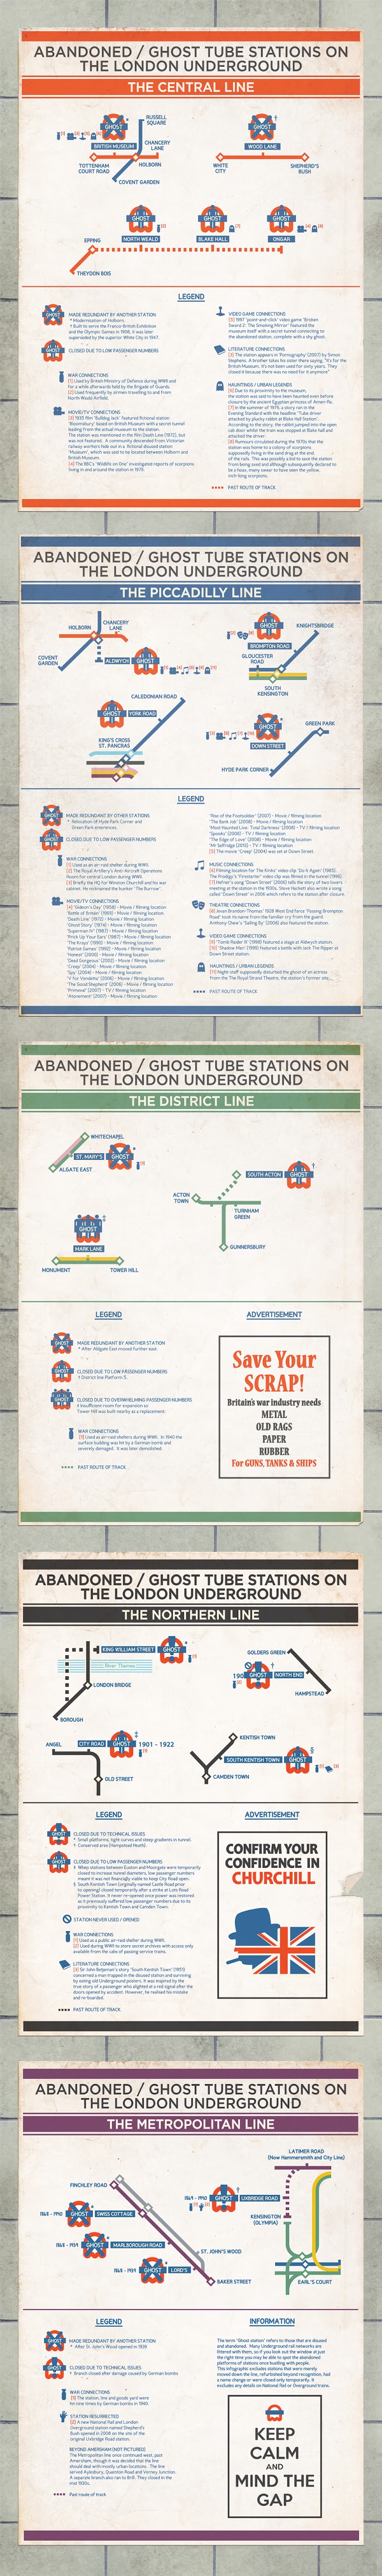 Abandoned / Ghost Stations on the London Underground #infographic